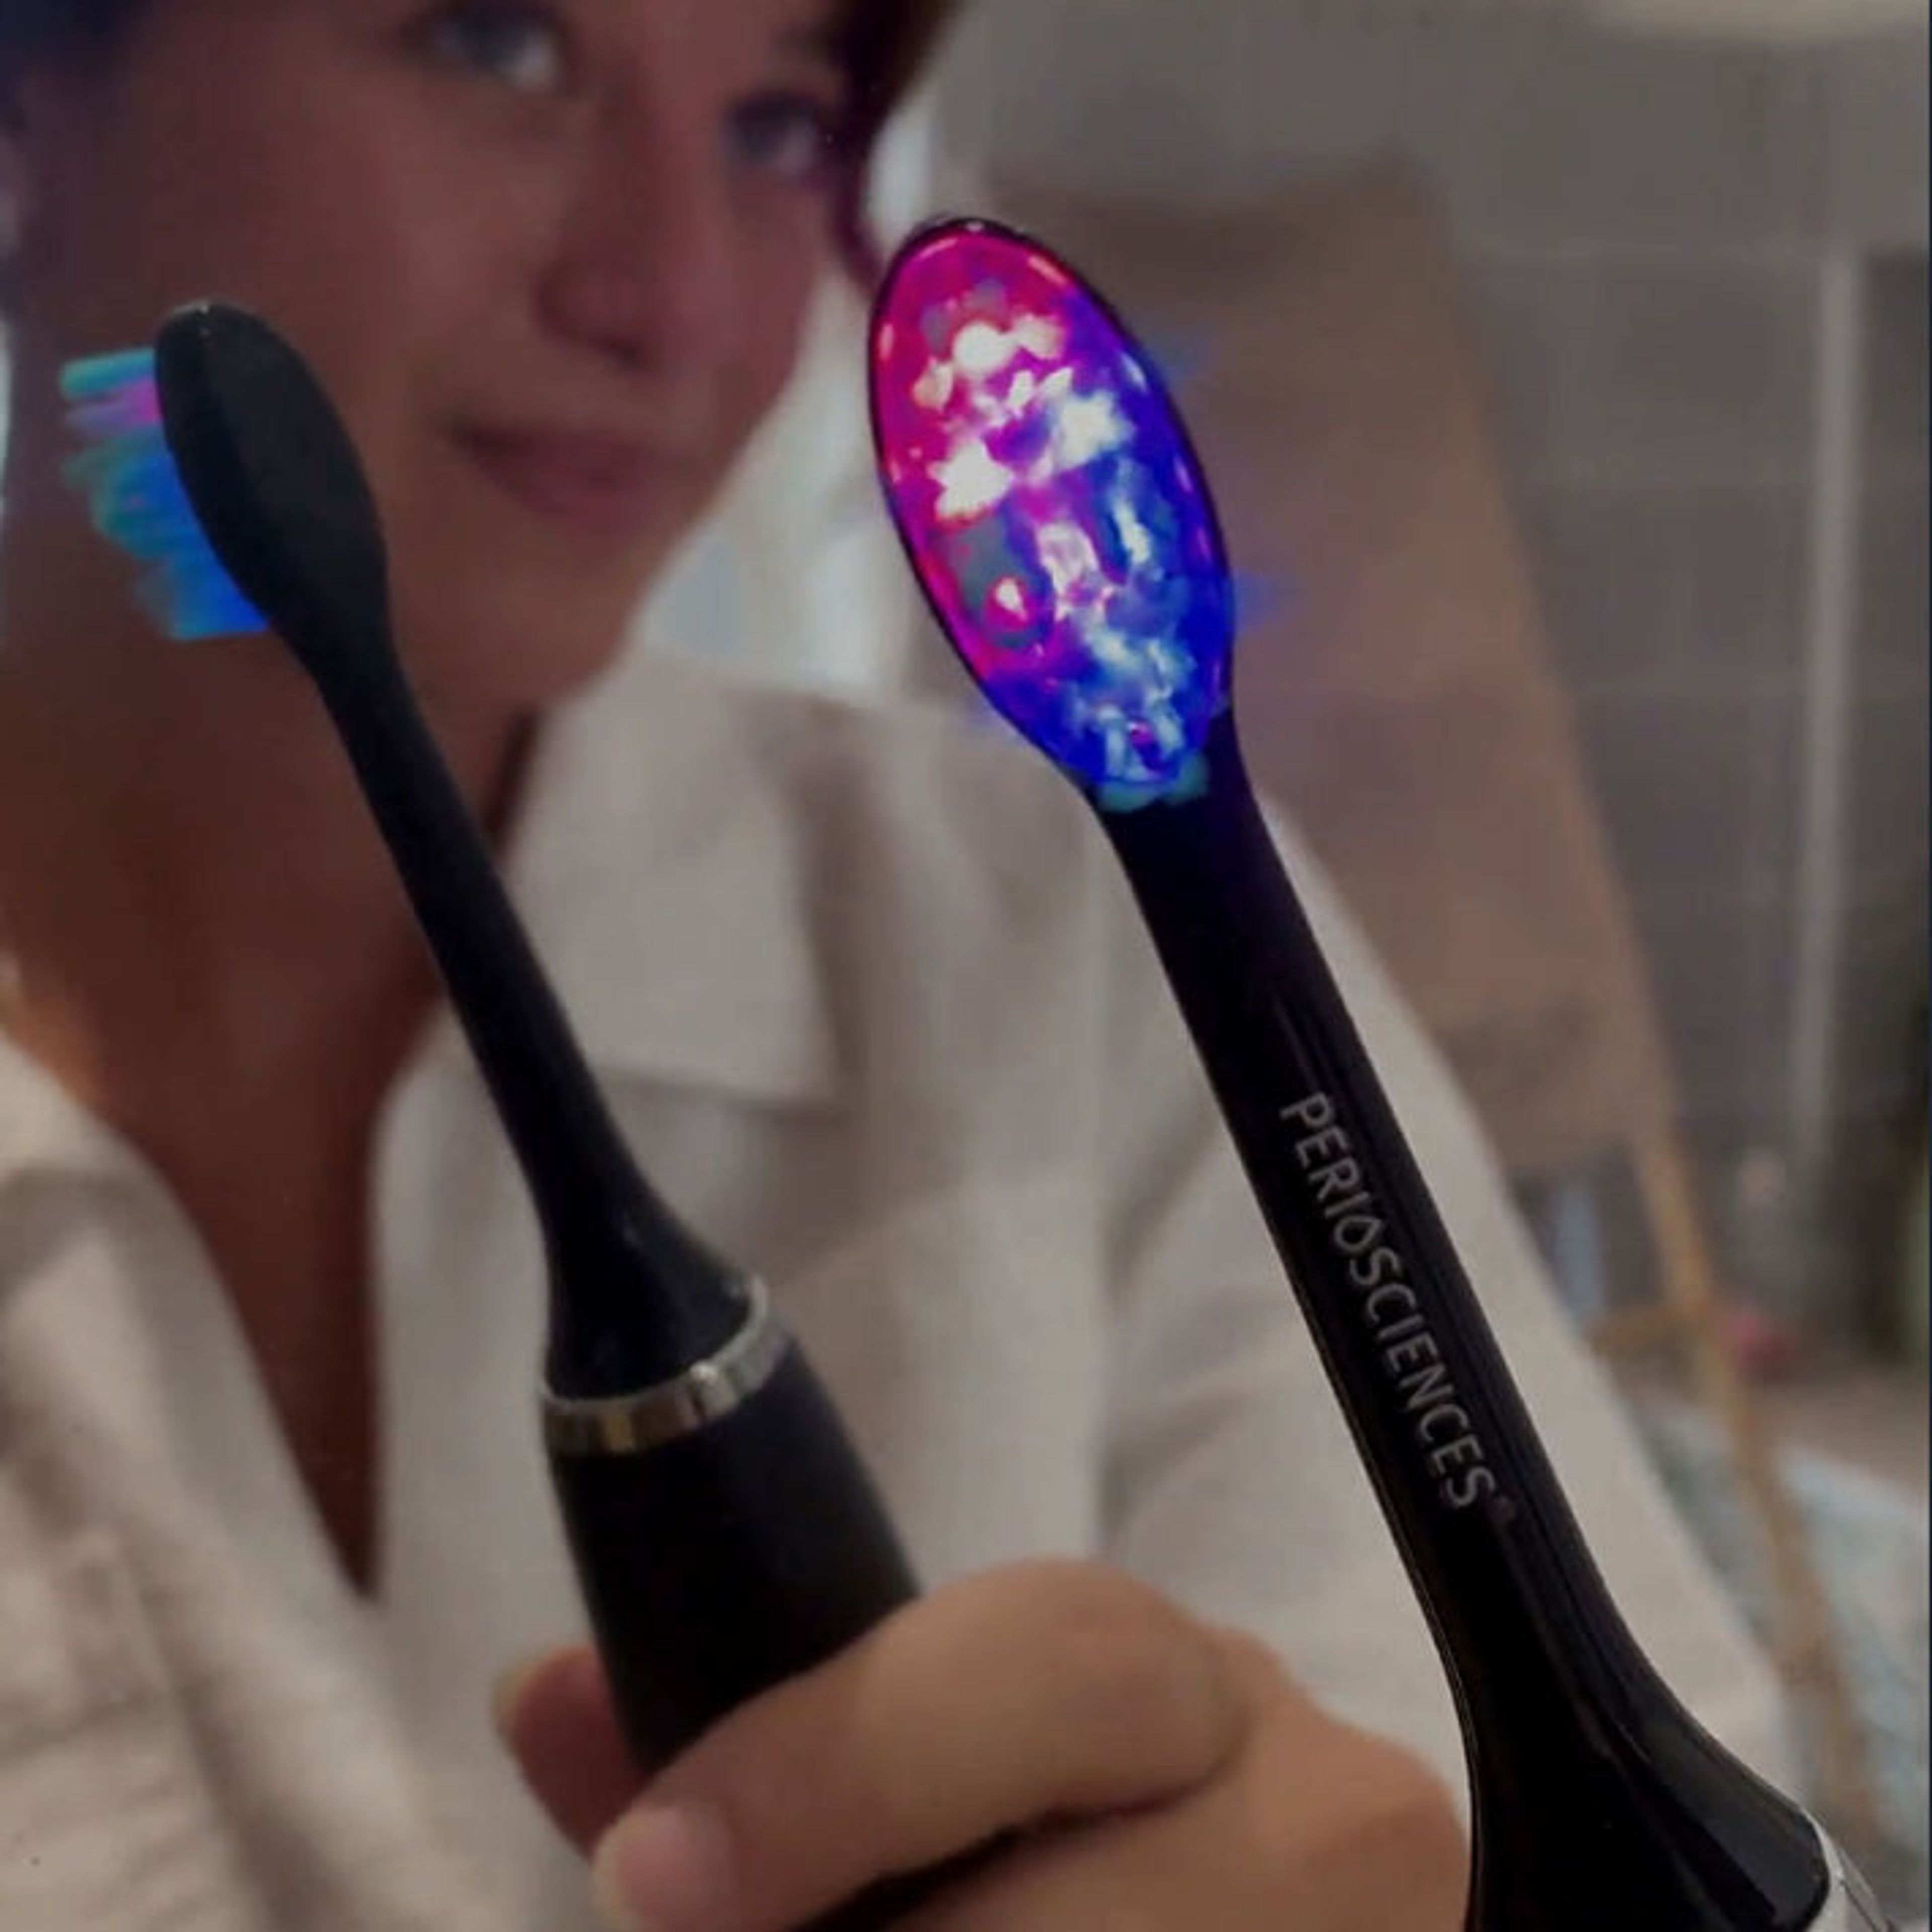 Replacement LED Toothbrush Heads